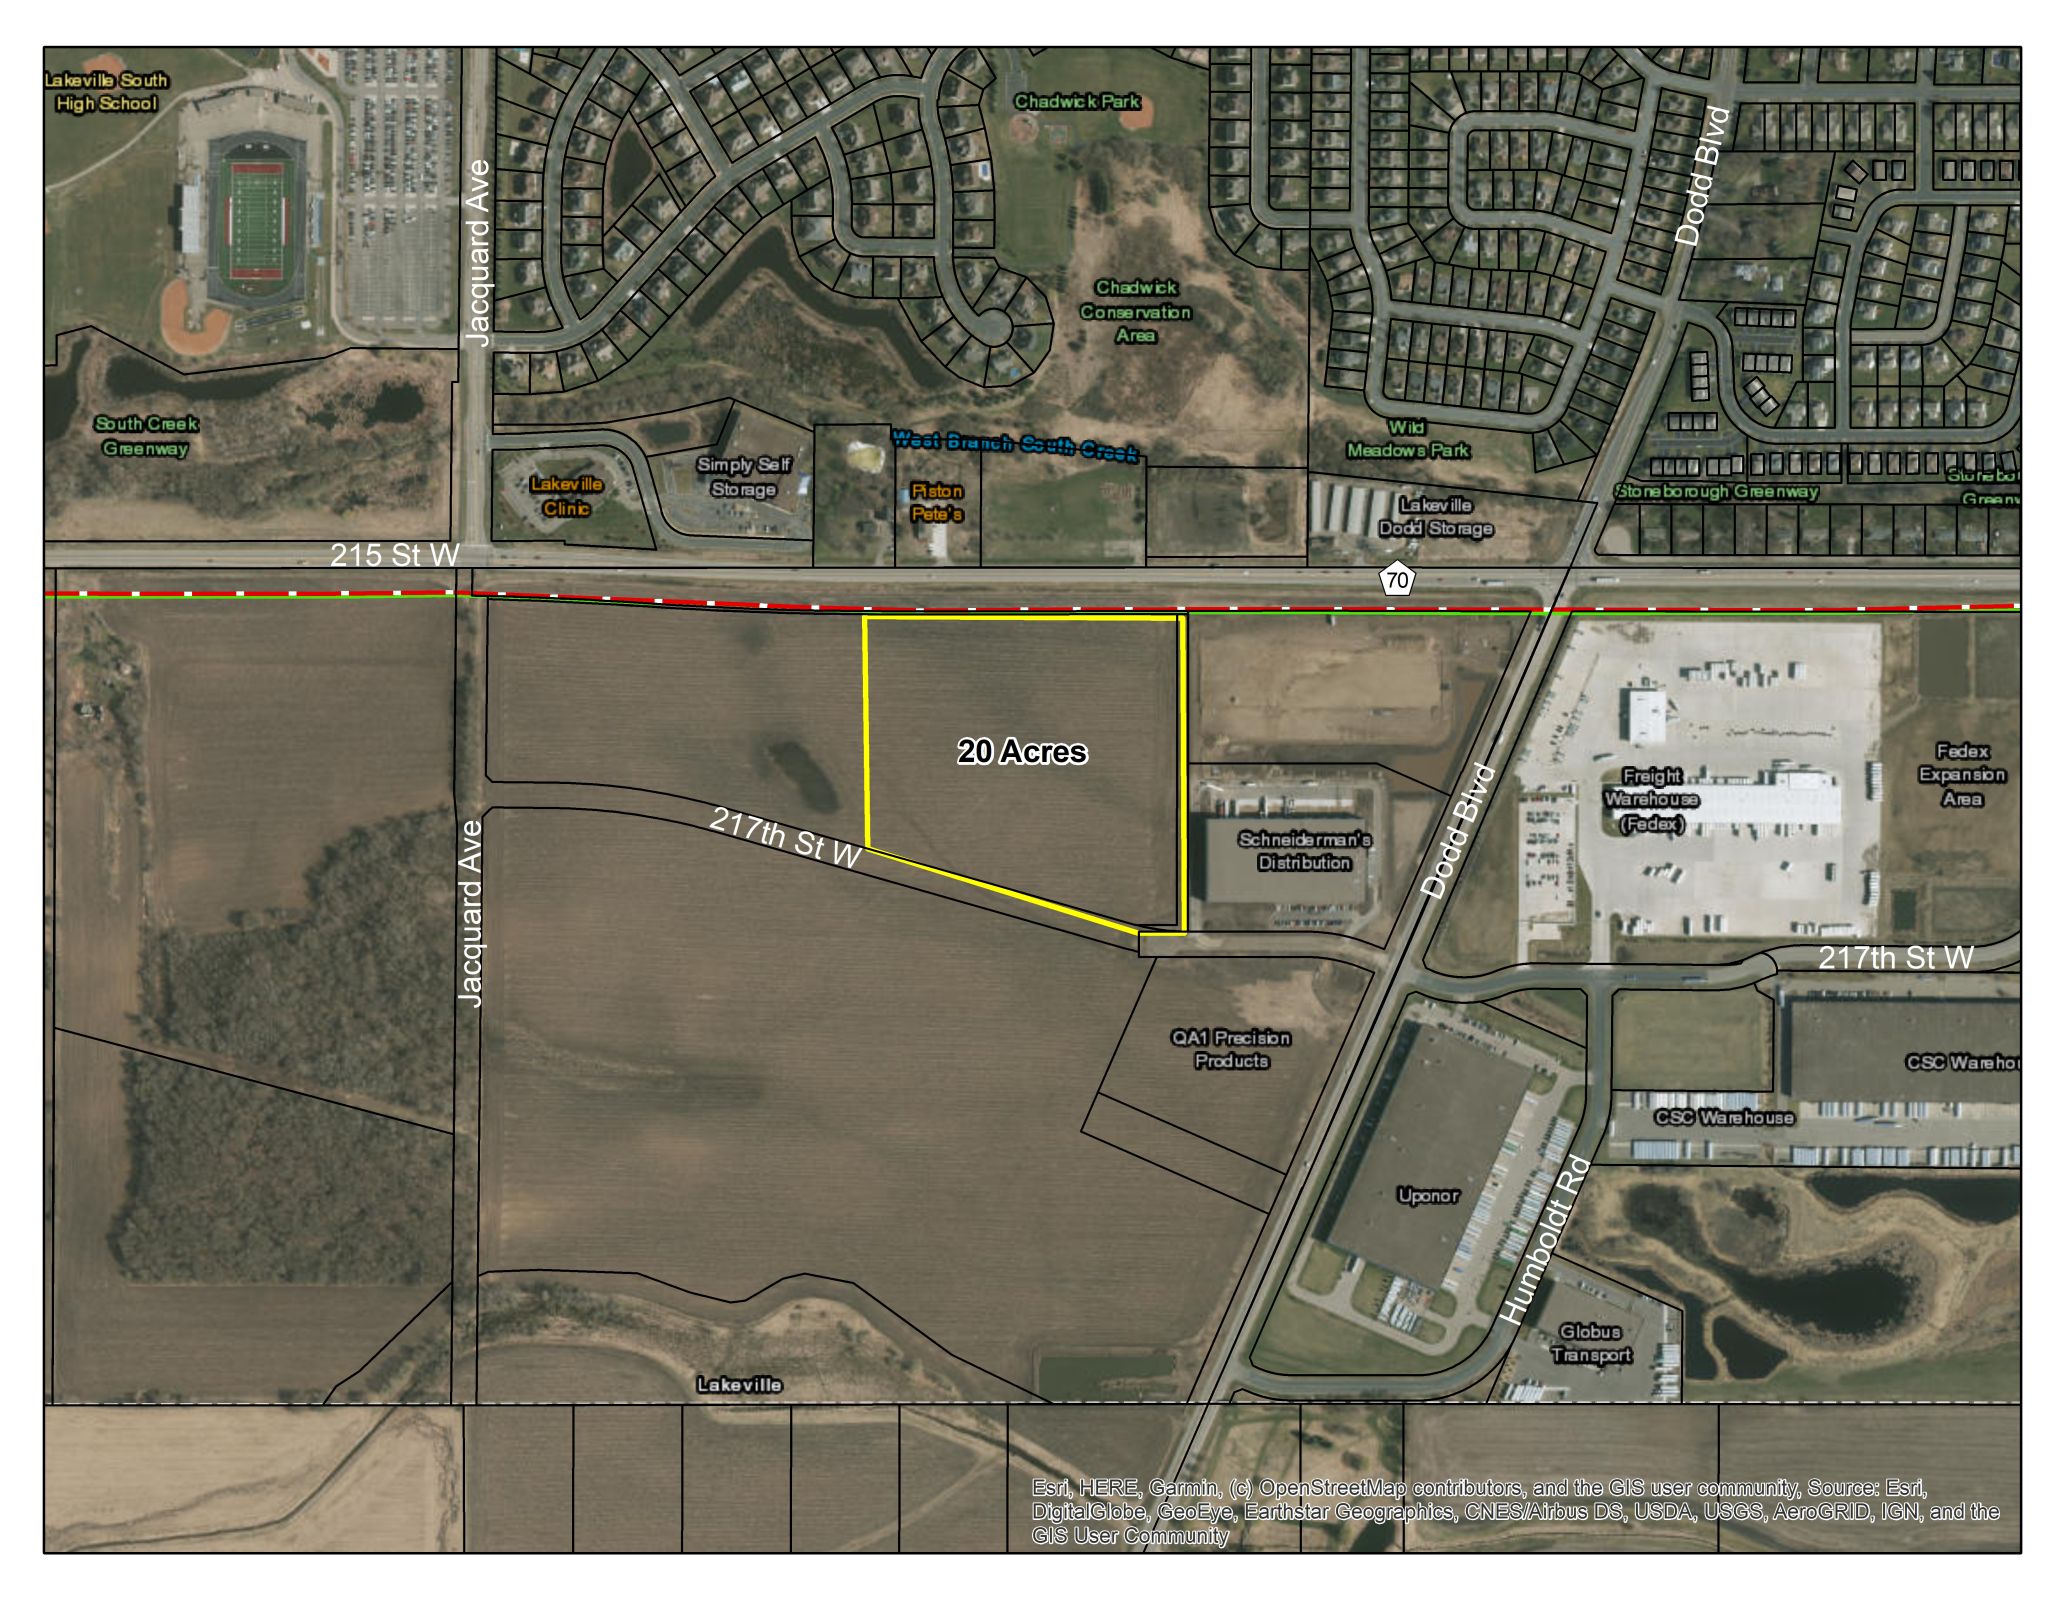 Main Photo For Interstate South Logistics Park Data Center Site (Lakeville, MN)